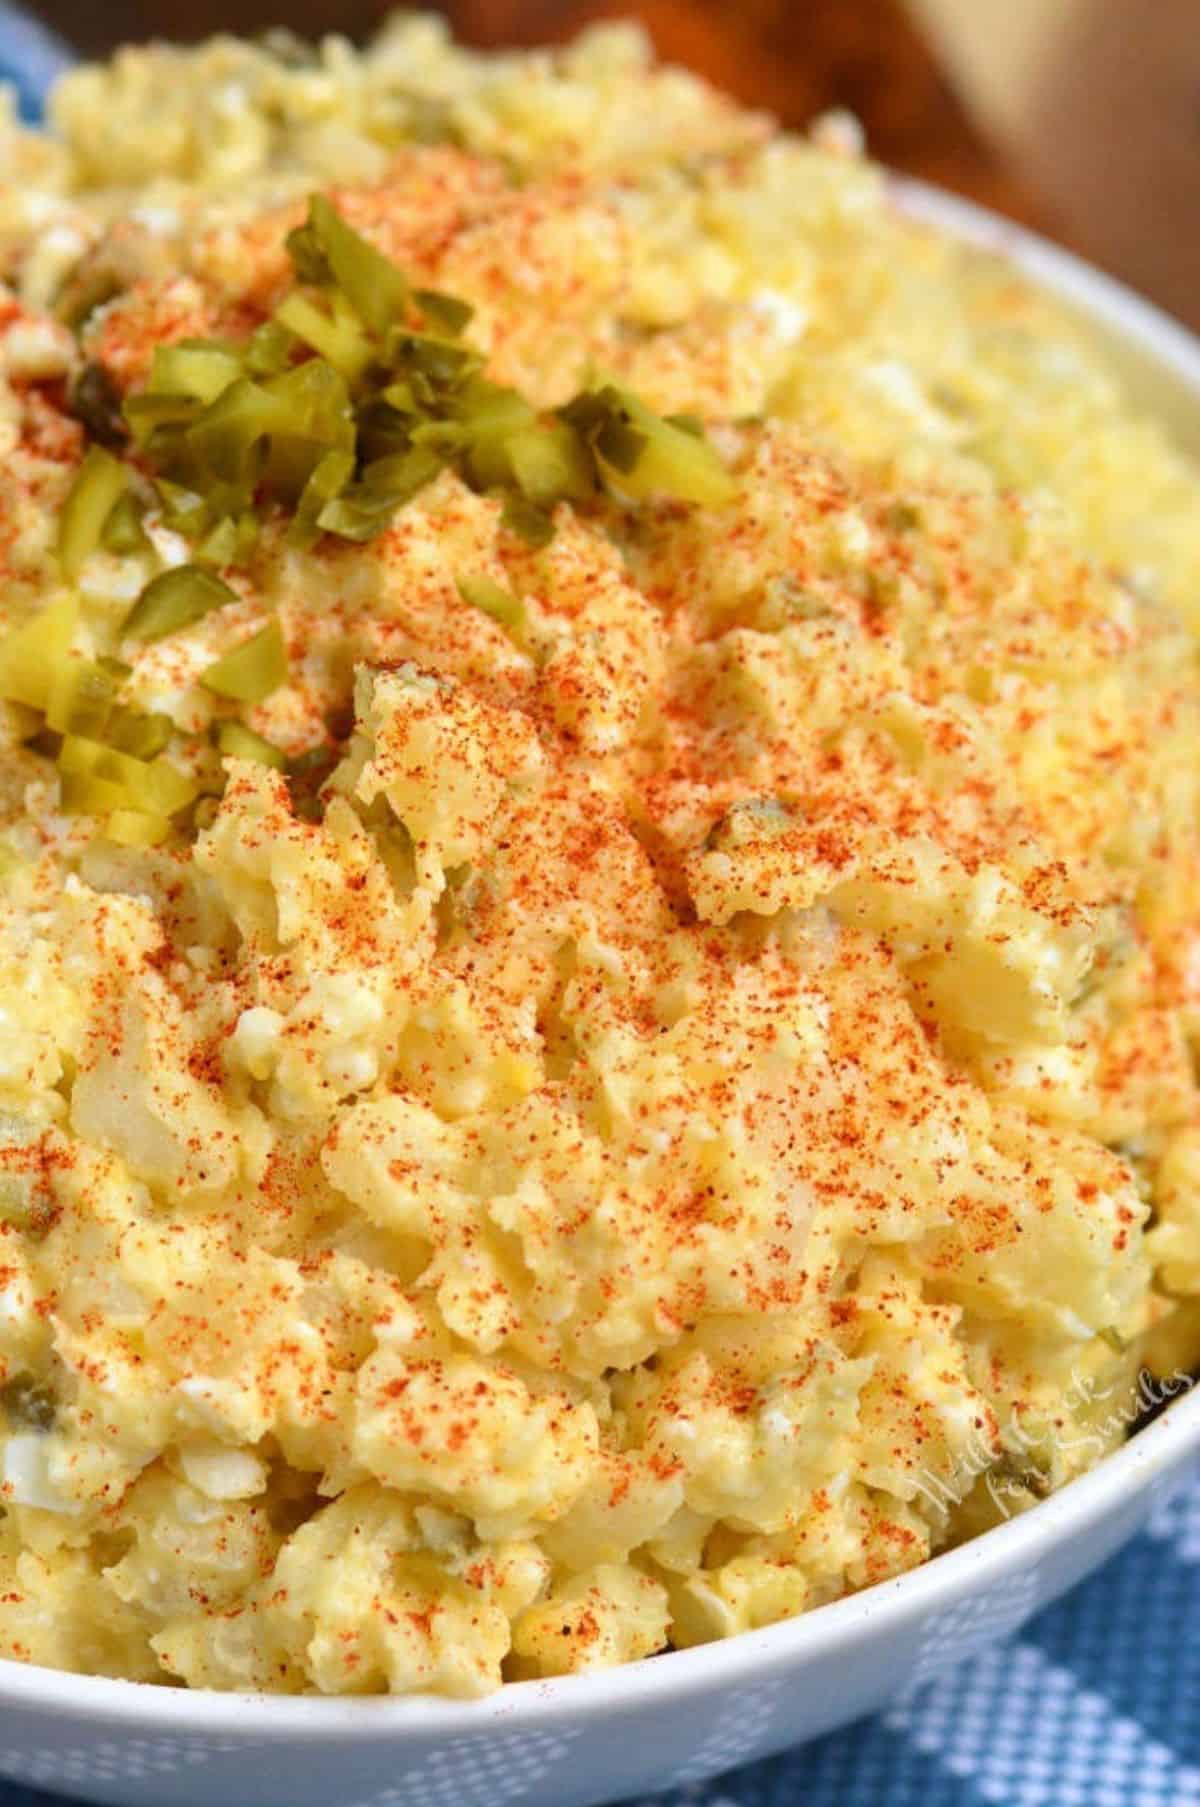 mixed southern potato salad in a white bowl with paprika and pickles.